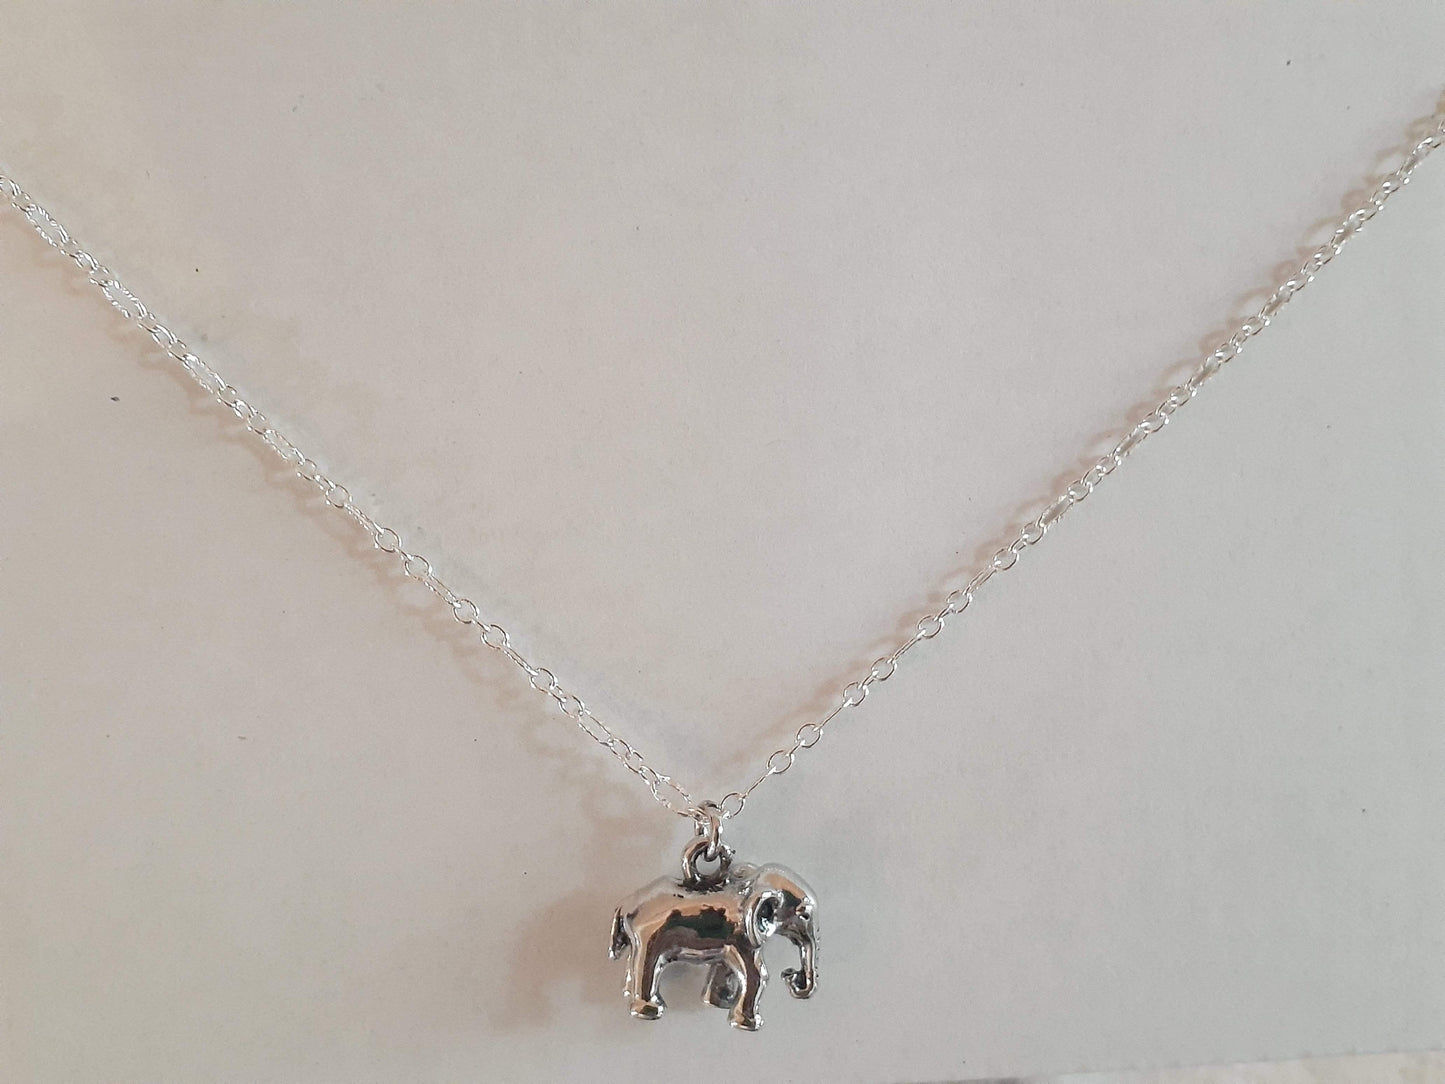 Silver Elephant Necklace - Beautiful Petite Elephant Necklace (14 in)